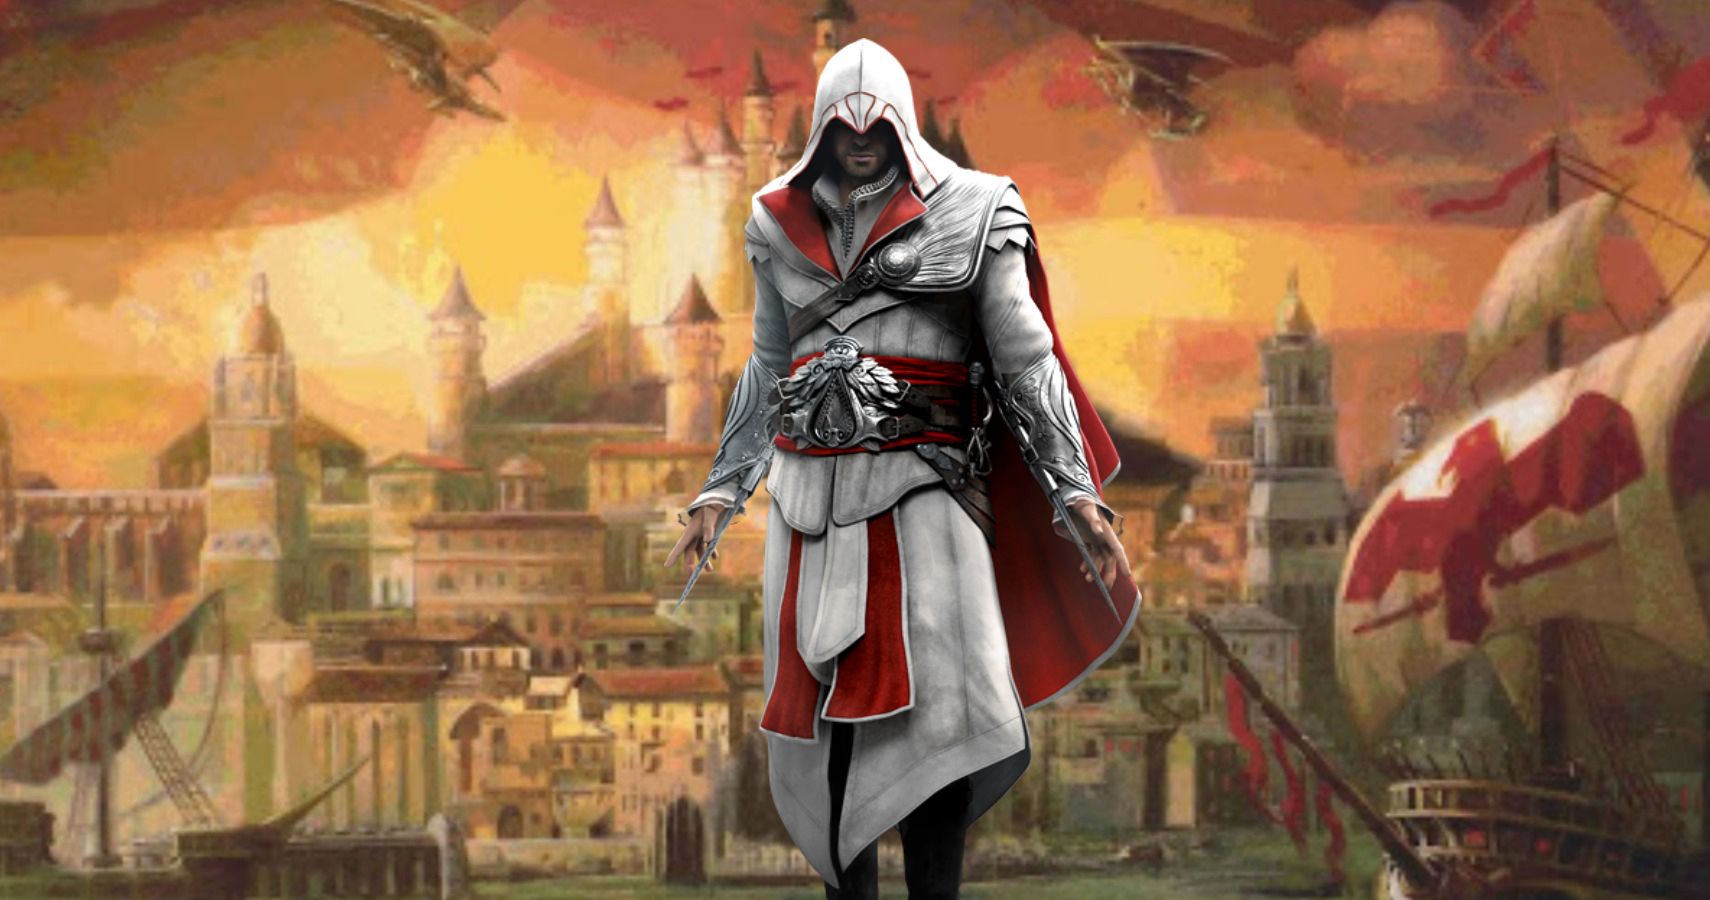 How To Build Ezio From Assassin’s Creed In Dungeons & Dragons